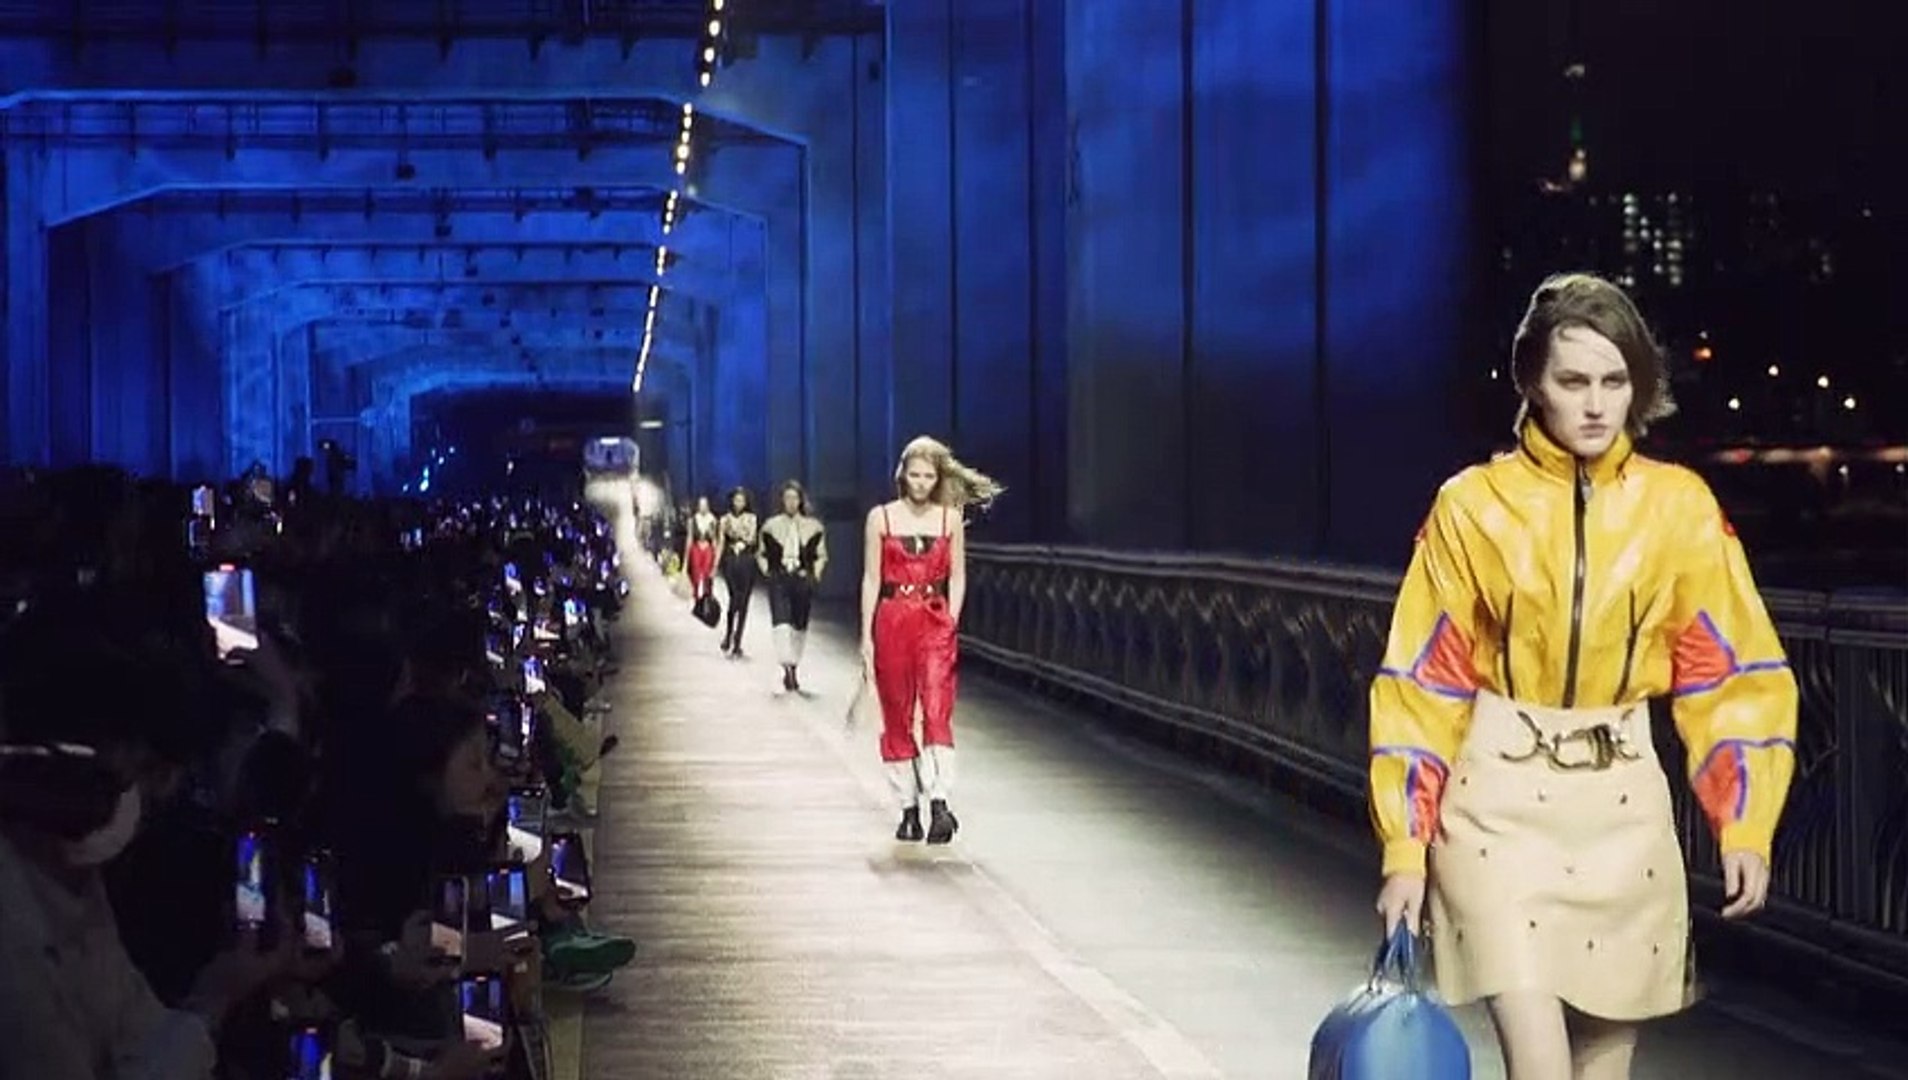 See highlights from Louis Vuitton's Seoul show